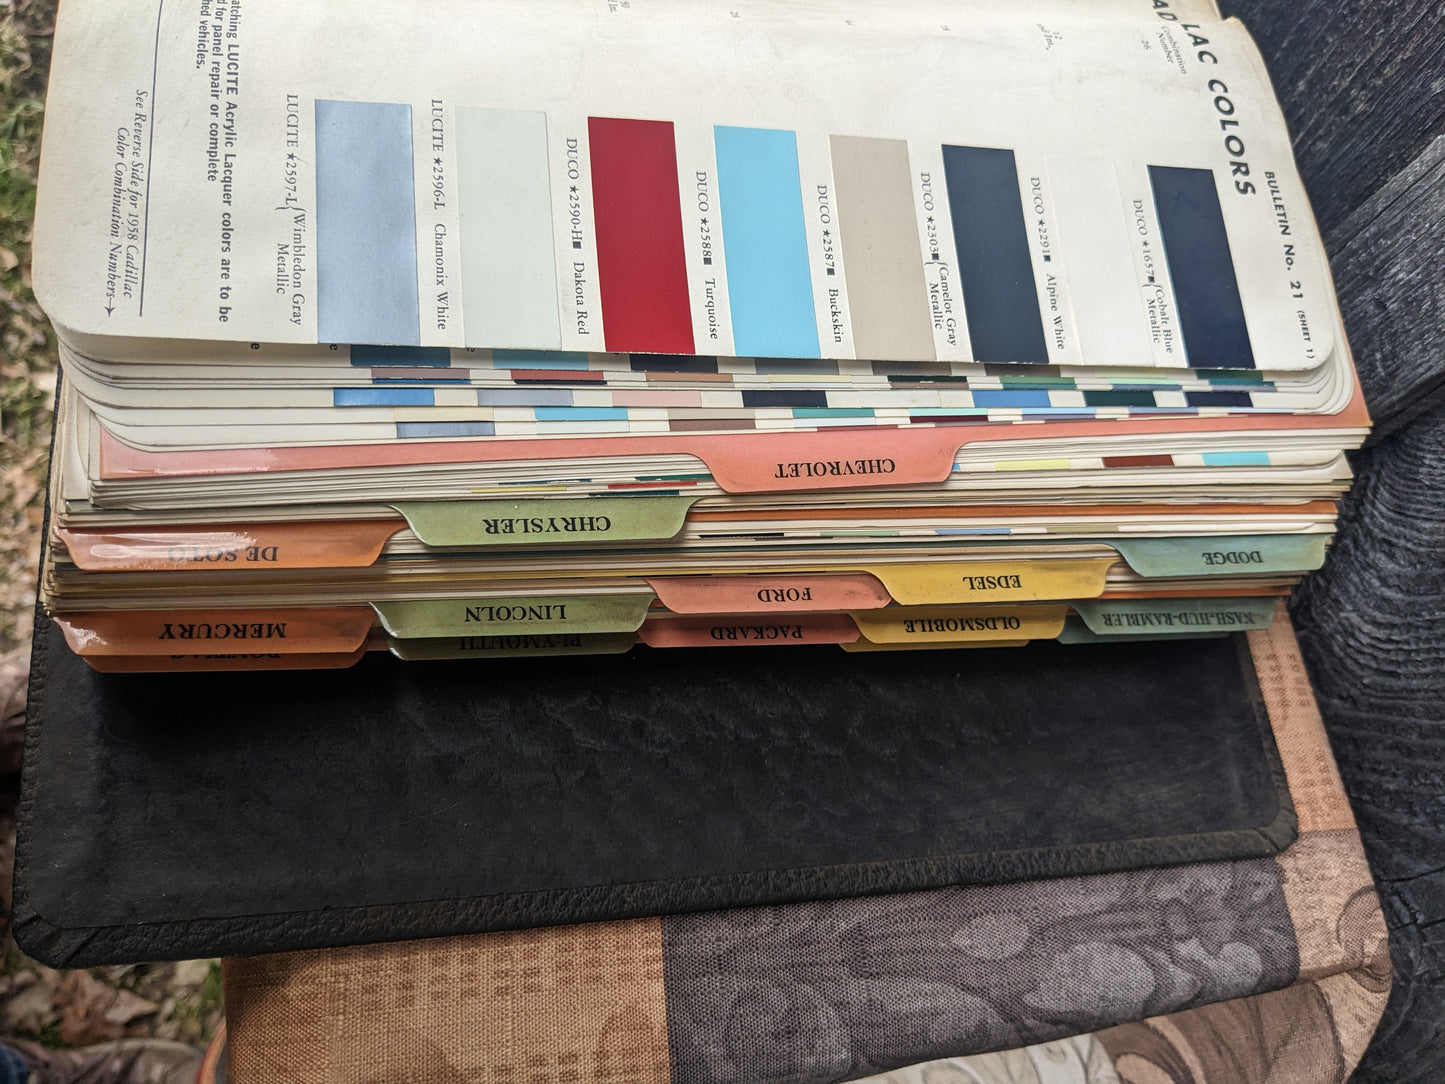 Du Pont Automotive Color Match Duco Dulux 1960s-Chevy Ford, Dodge, Nash, Studebaker, Pacard and More